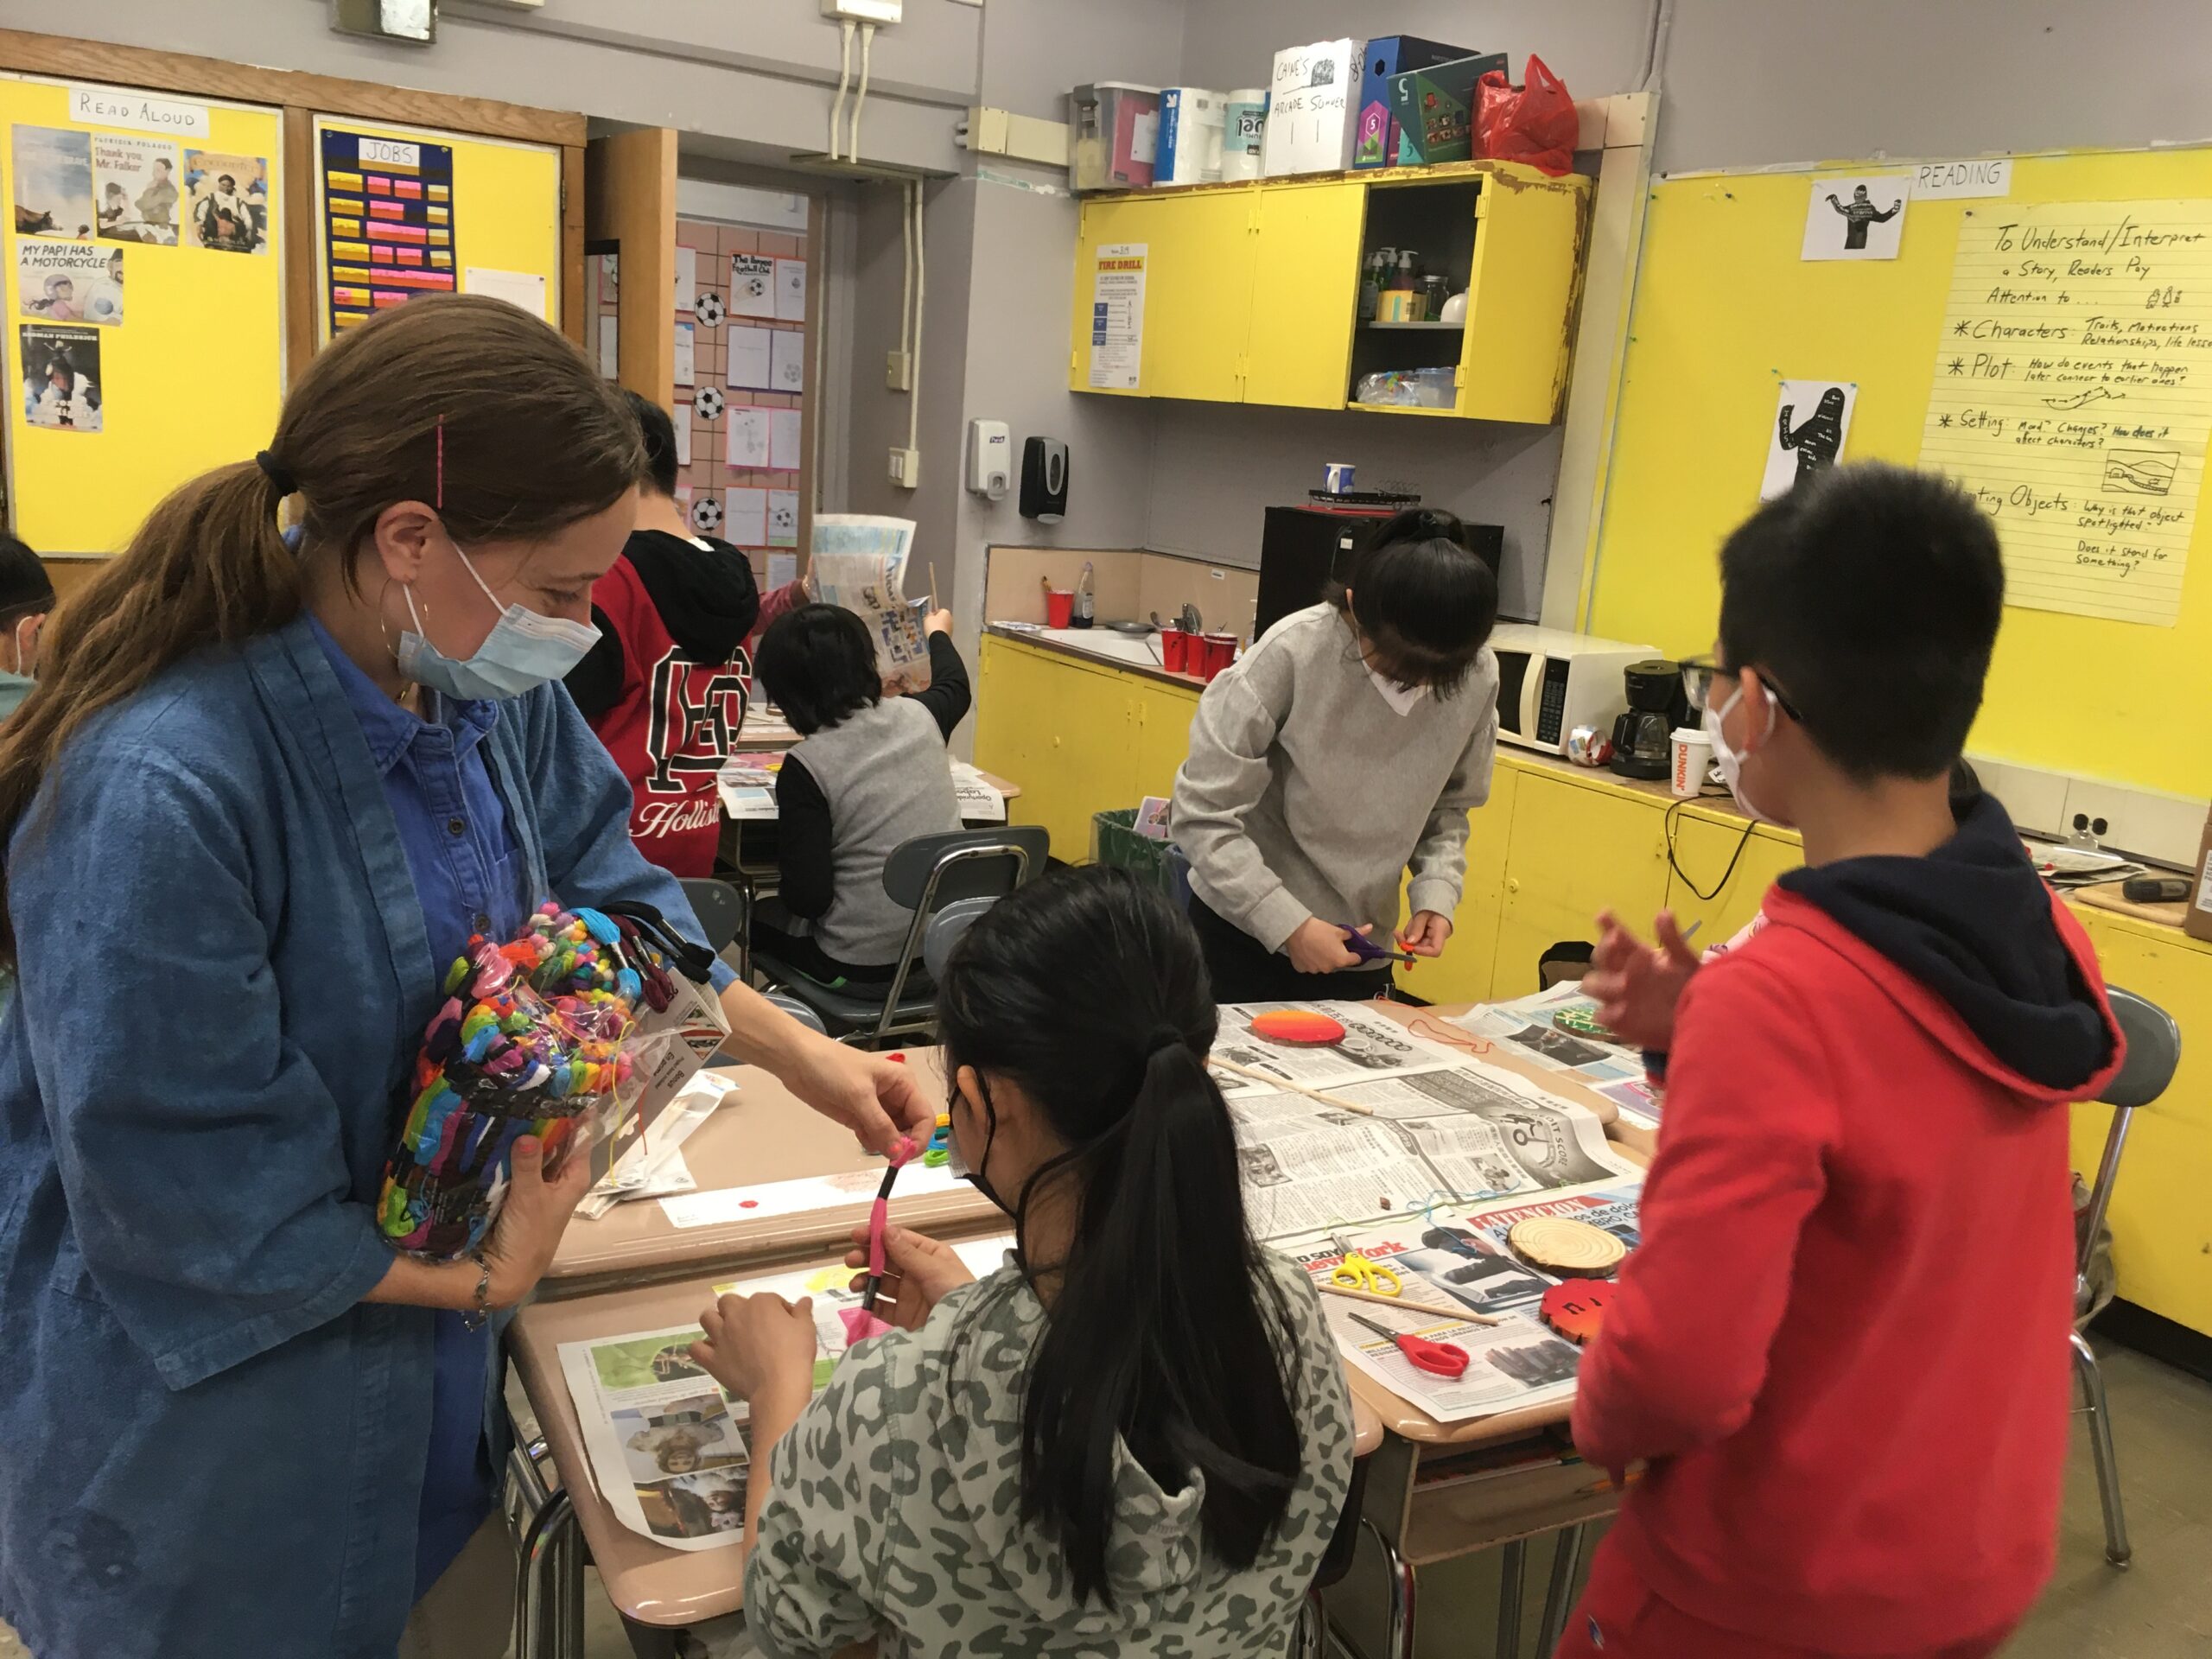 Libby Mislan assists students in creating a mobile, integrating visual arts with poetry.